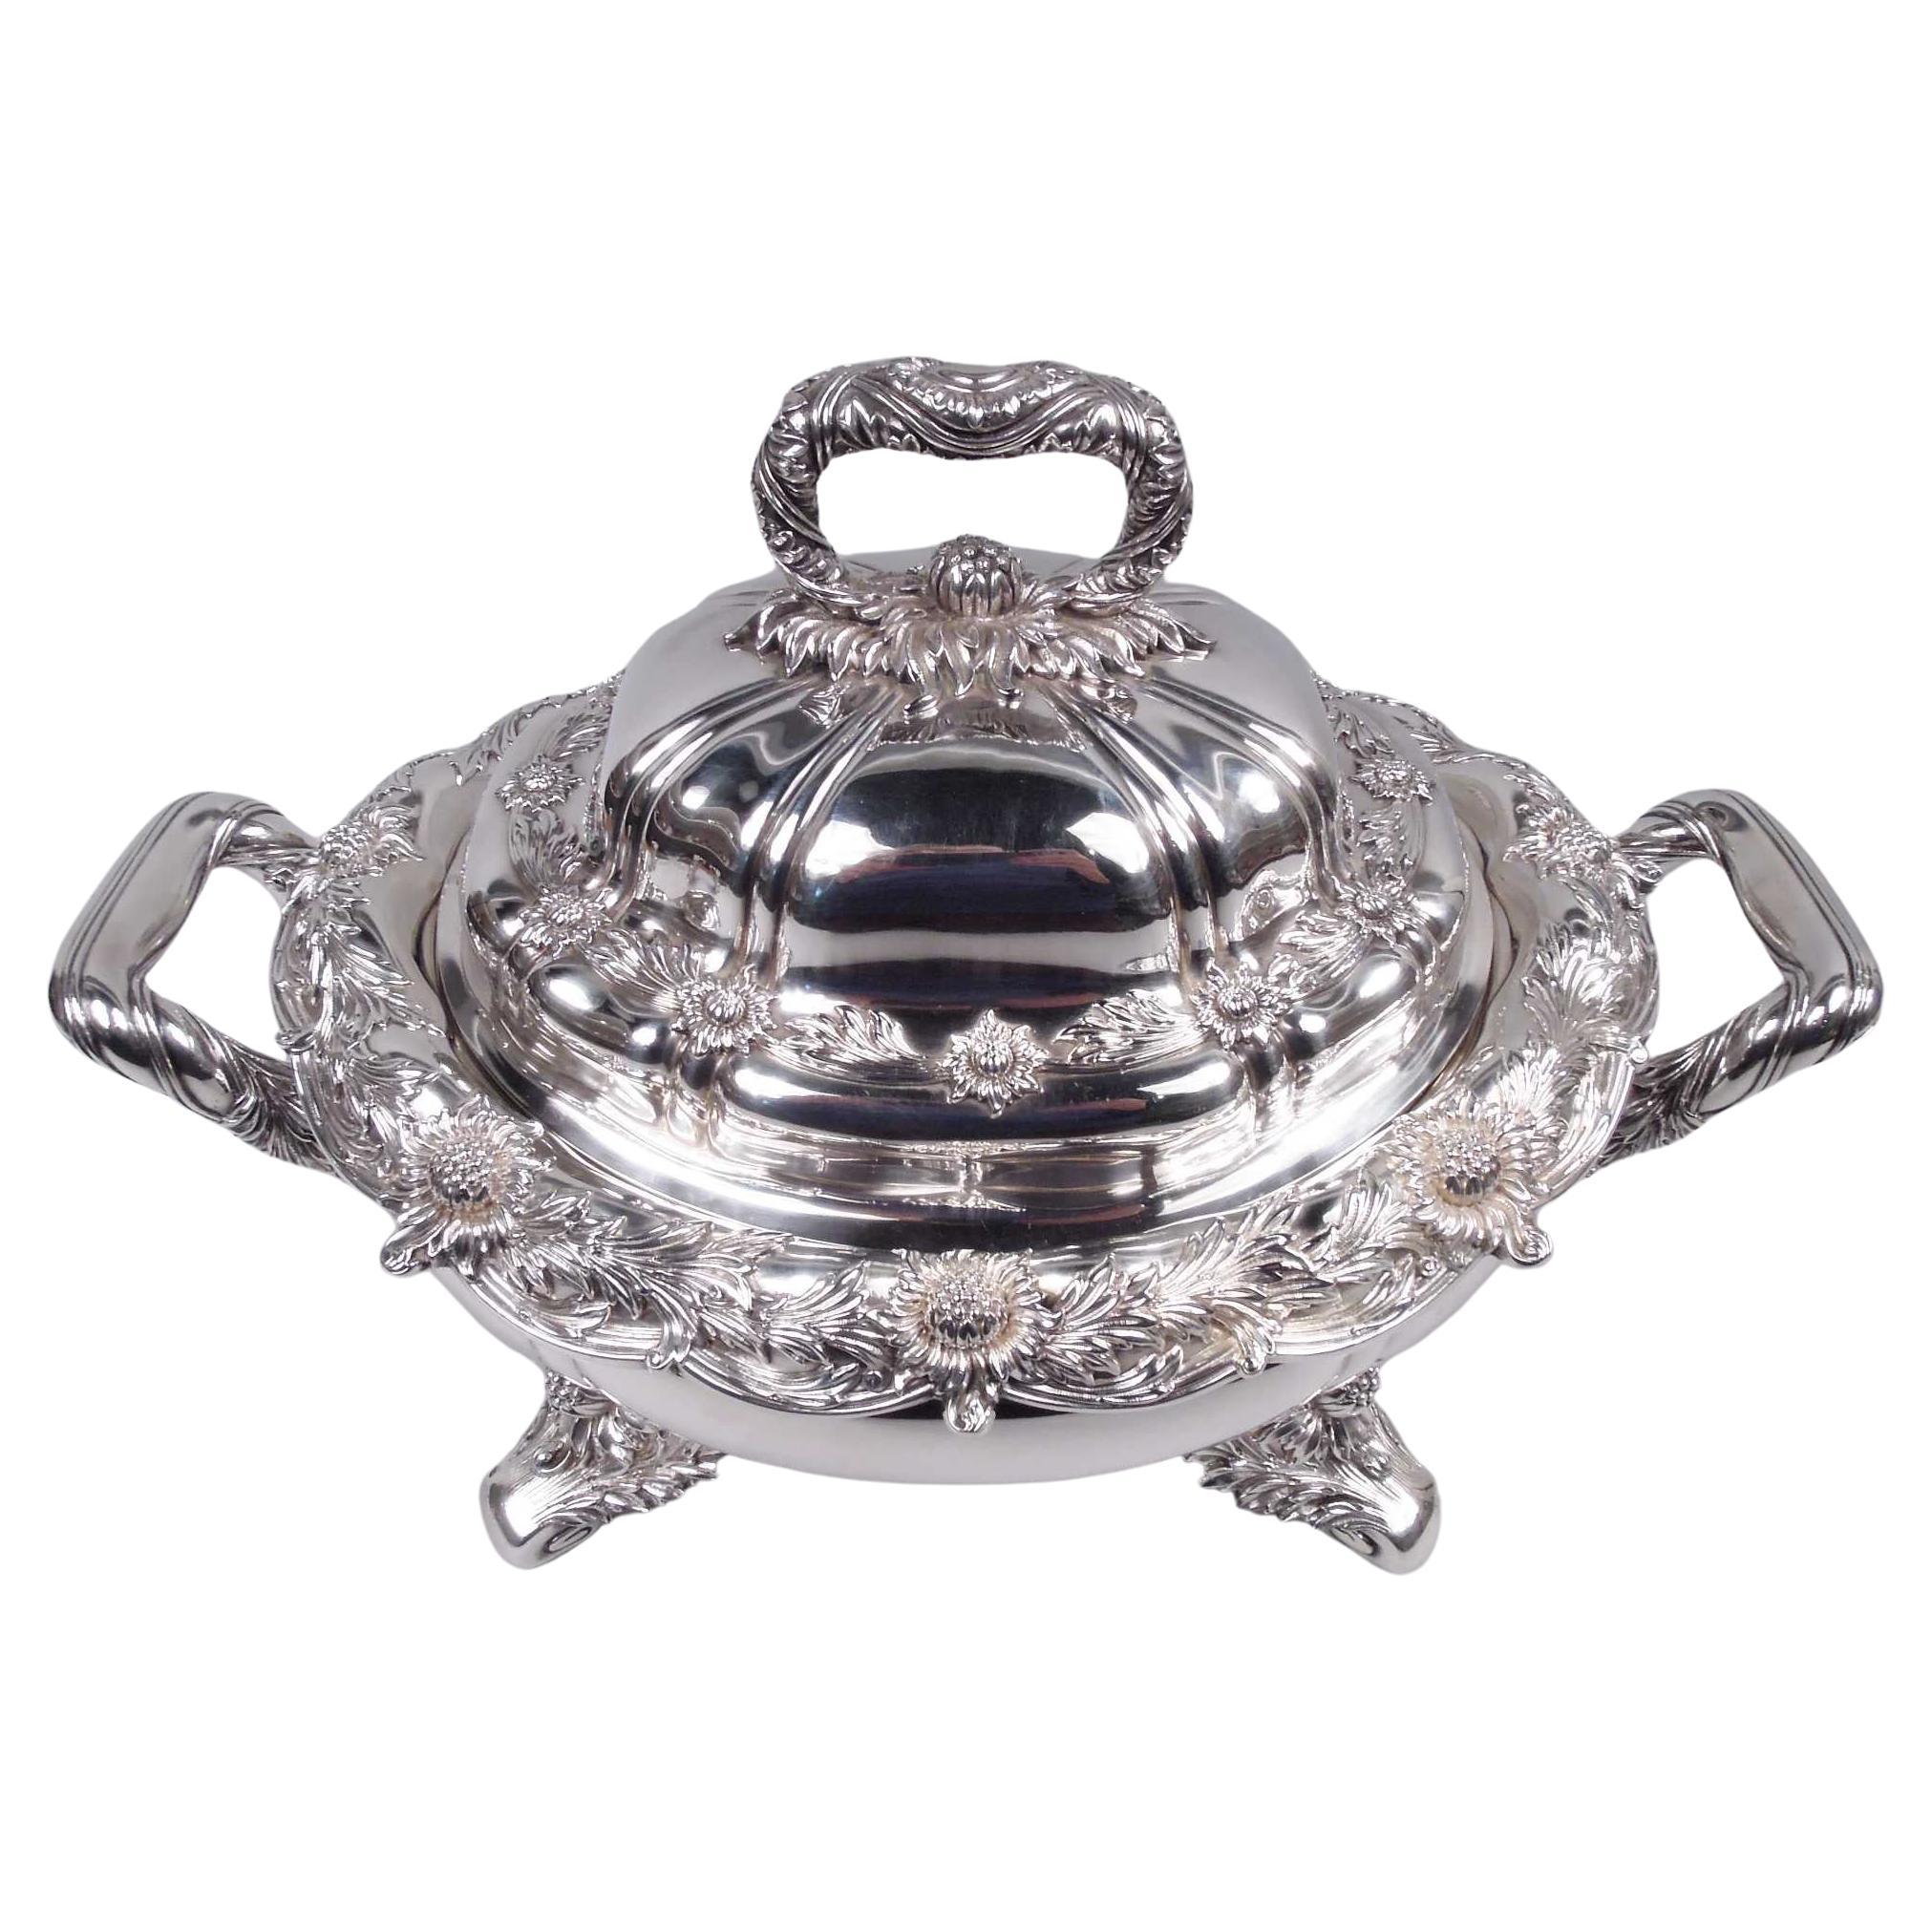 Rare Tiffany Sterling Silver Soup Tureen in Historic Chrysanthemum Pattern For Sale